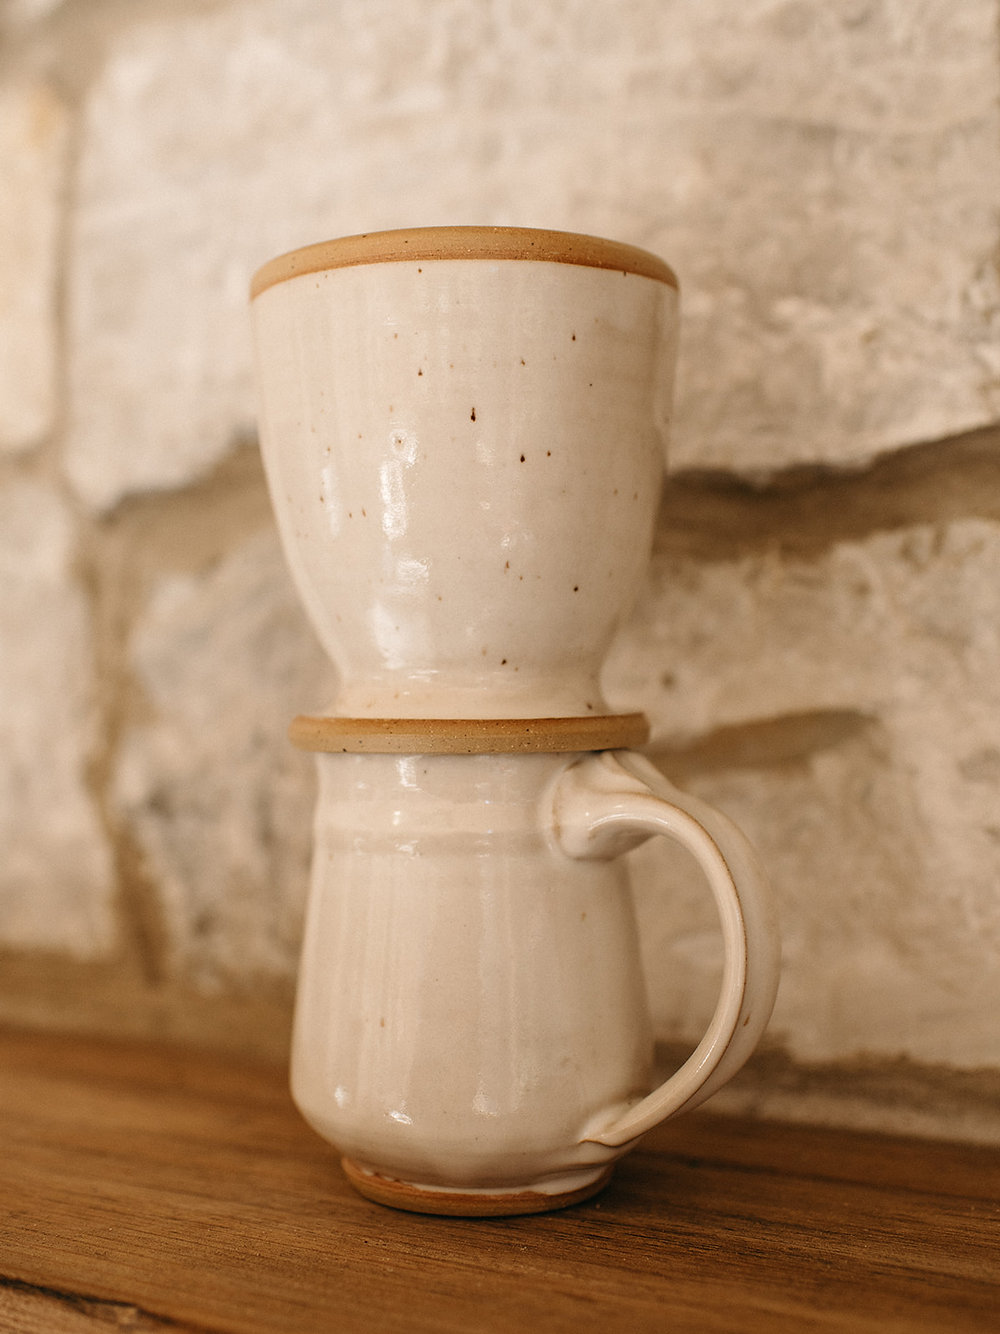 Featured image for “Cream Pour Over”